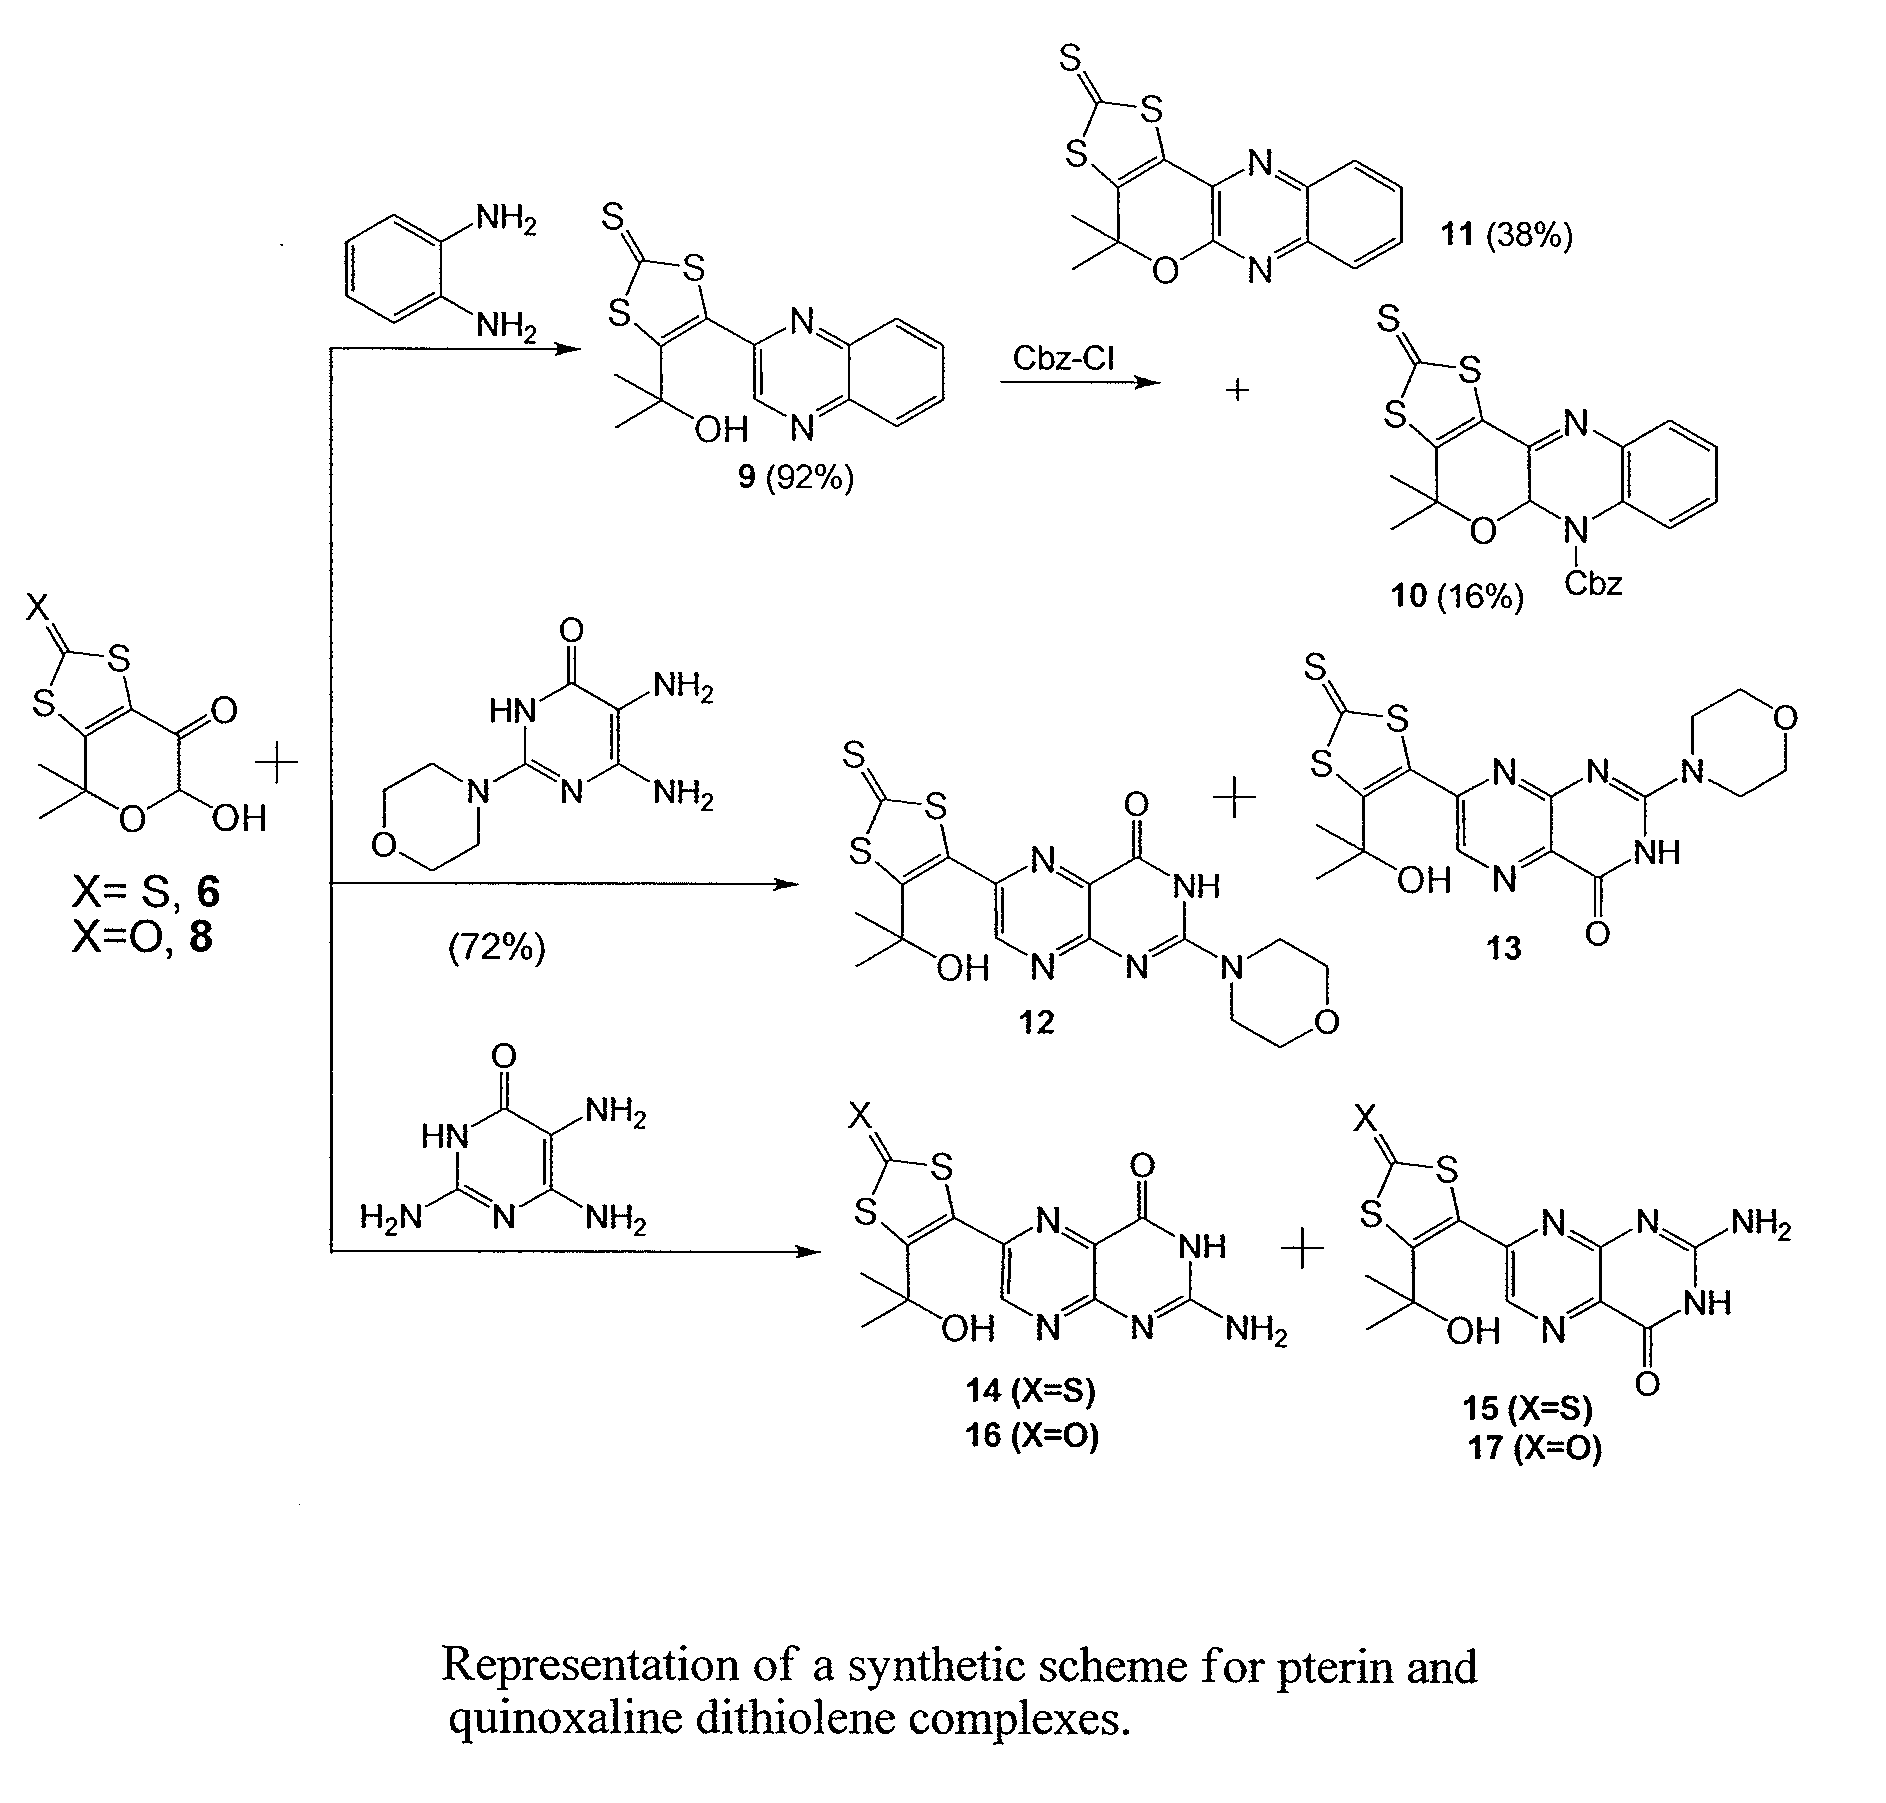 Composition, Synthesis, and Use of New Substituted Pyran and Pterin Compounds